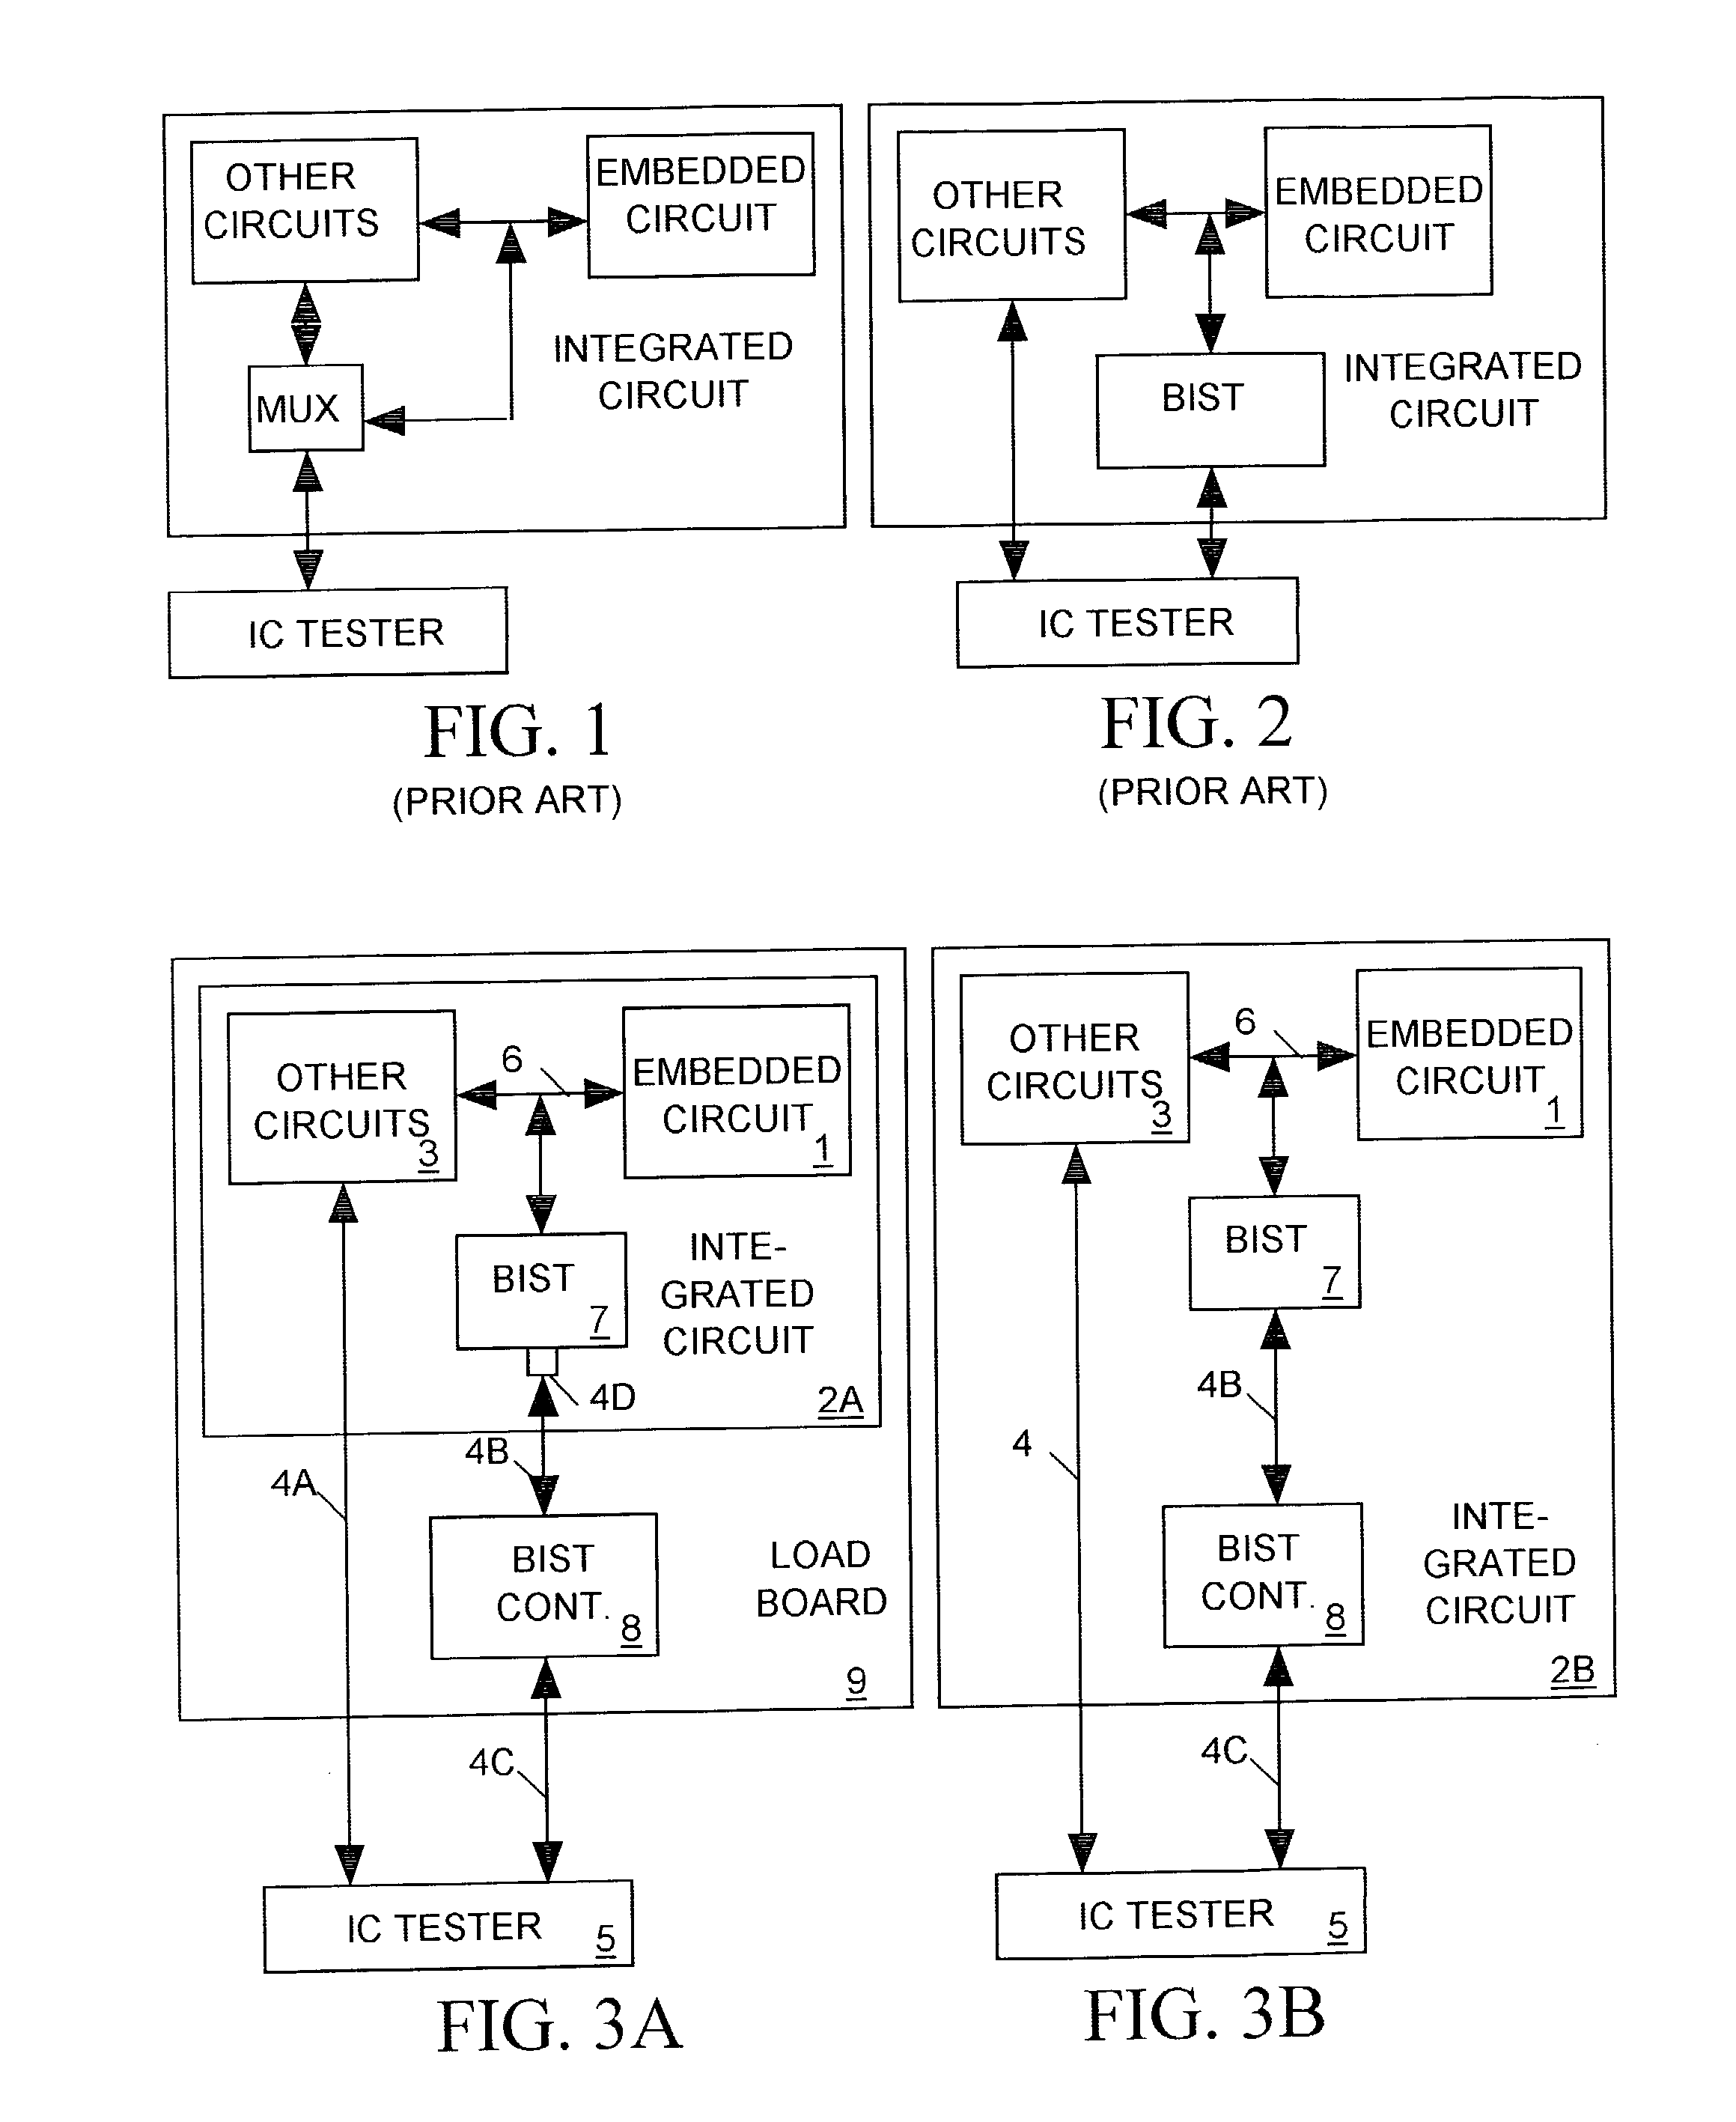 Partitionable embedded circuit test system for integrated circuit